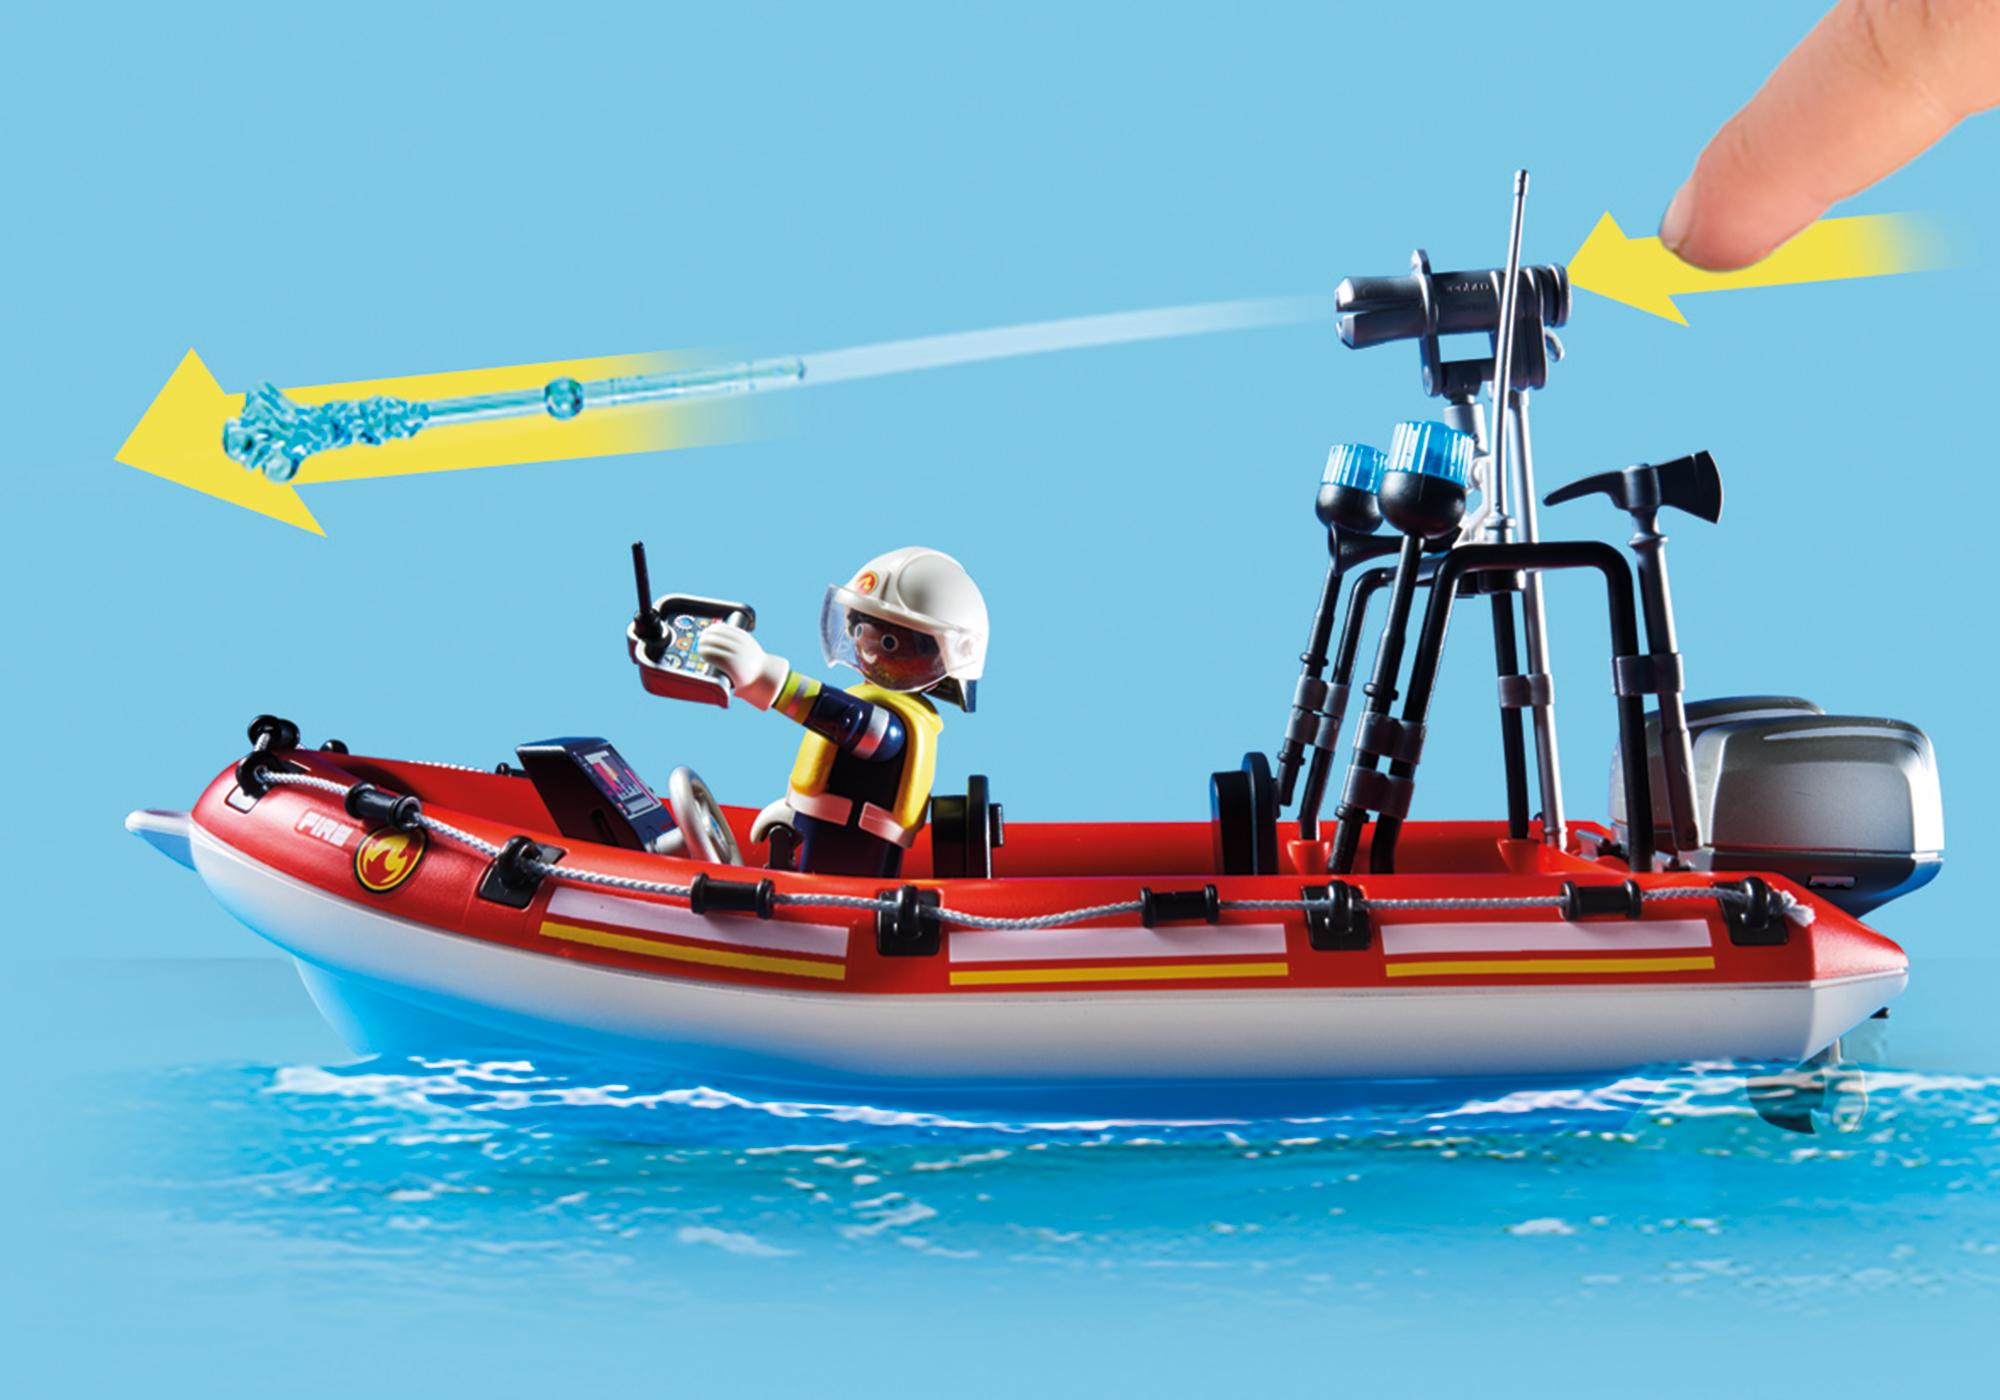 playmobil fire rescue mission